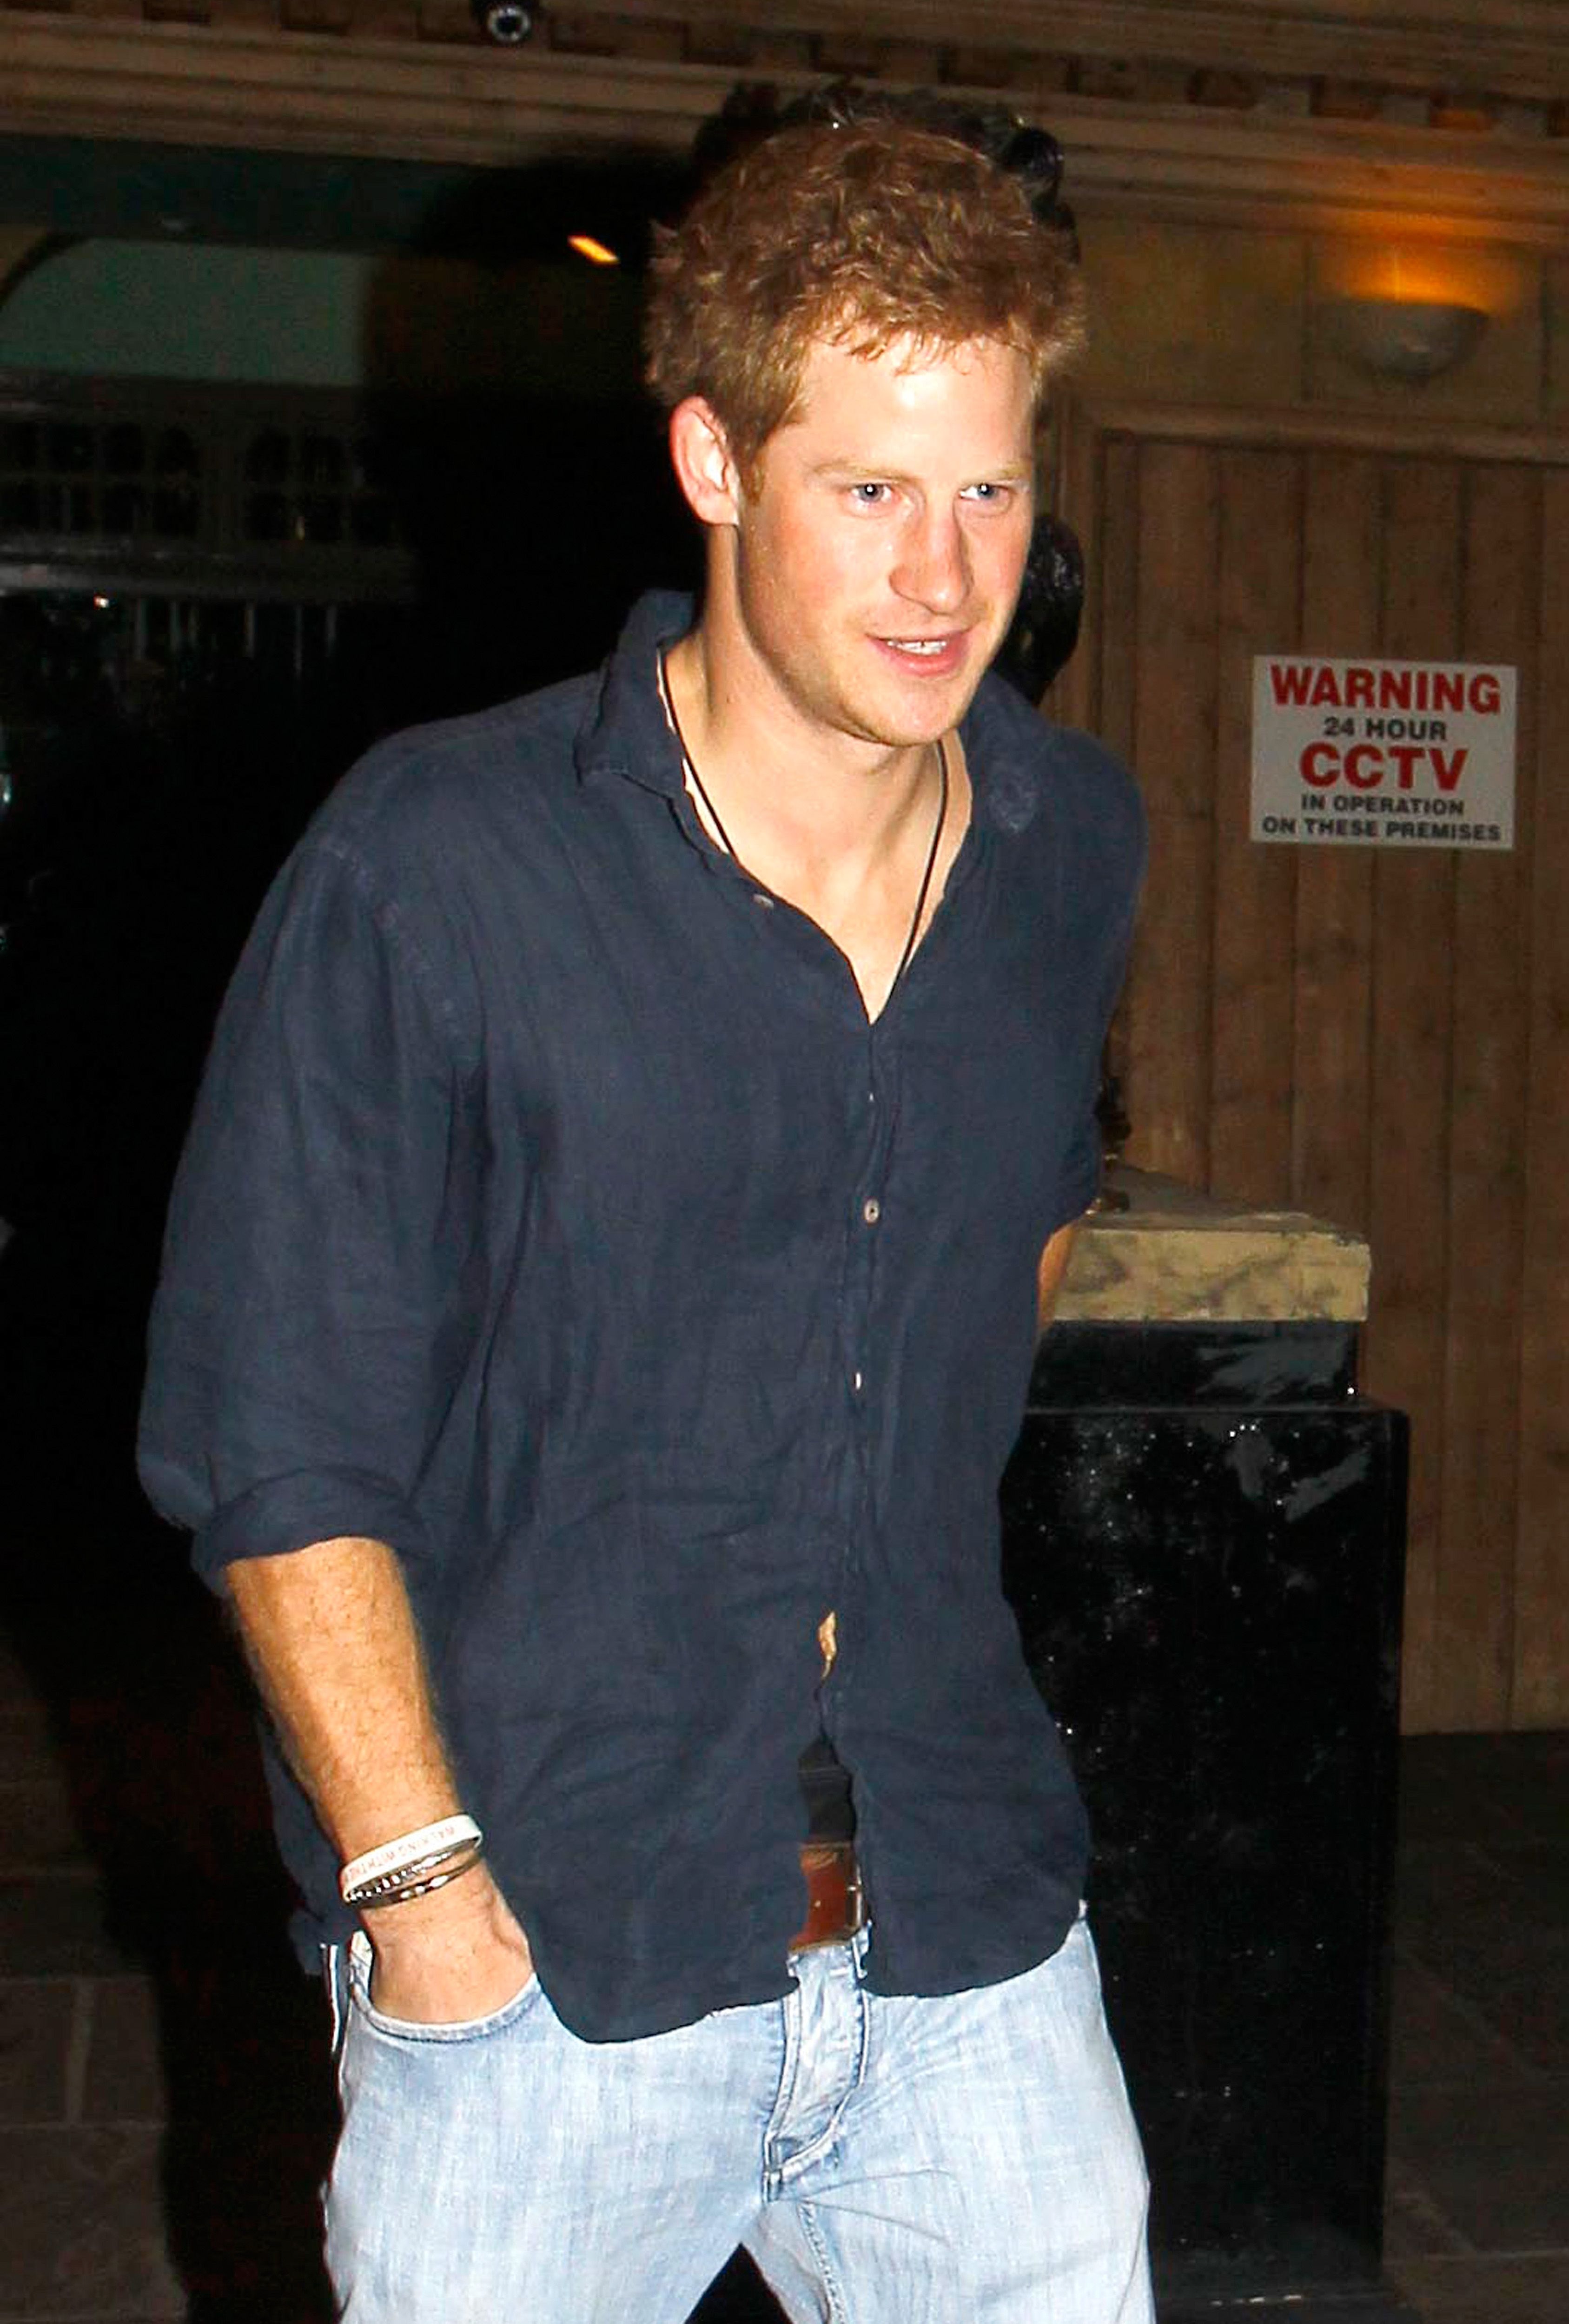 Prince Harry departs Public nightclub on September 24, 2011 in London, England | Source: Getty Images 